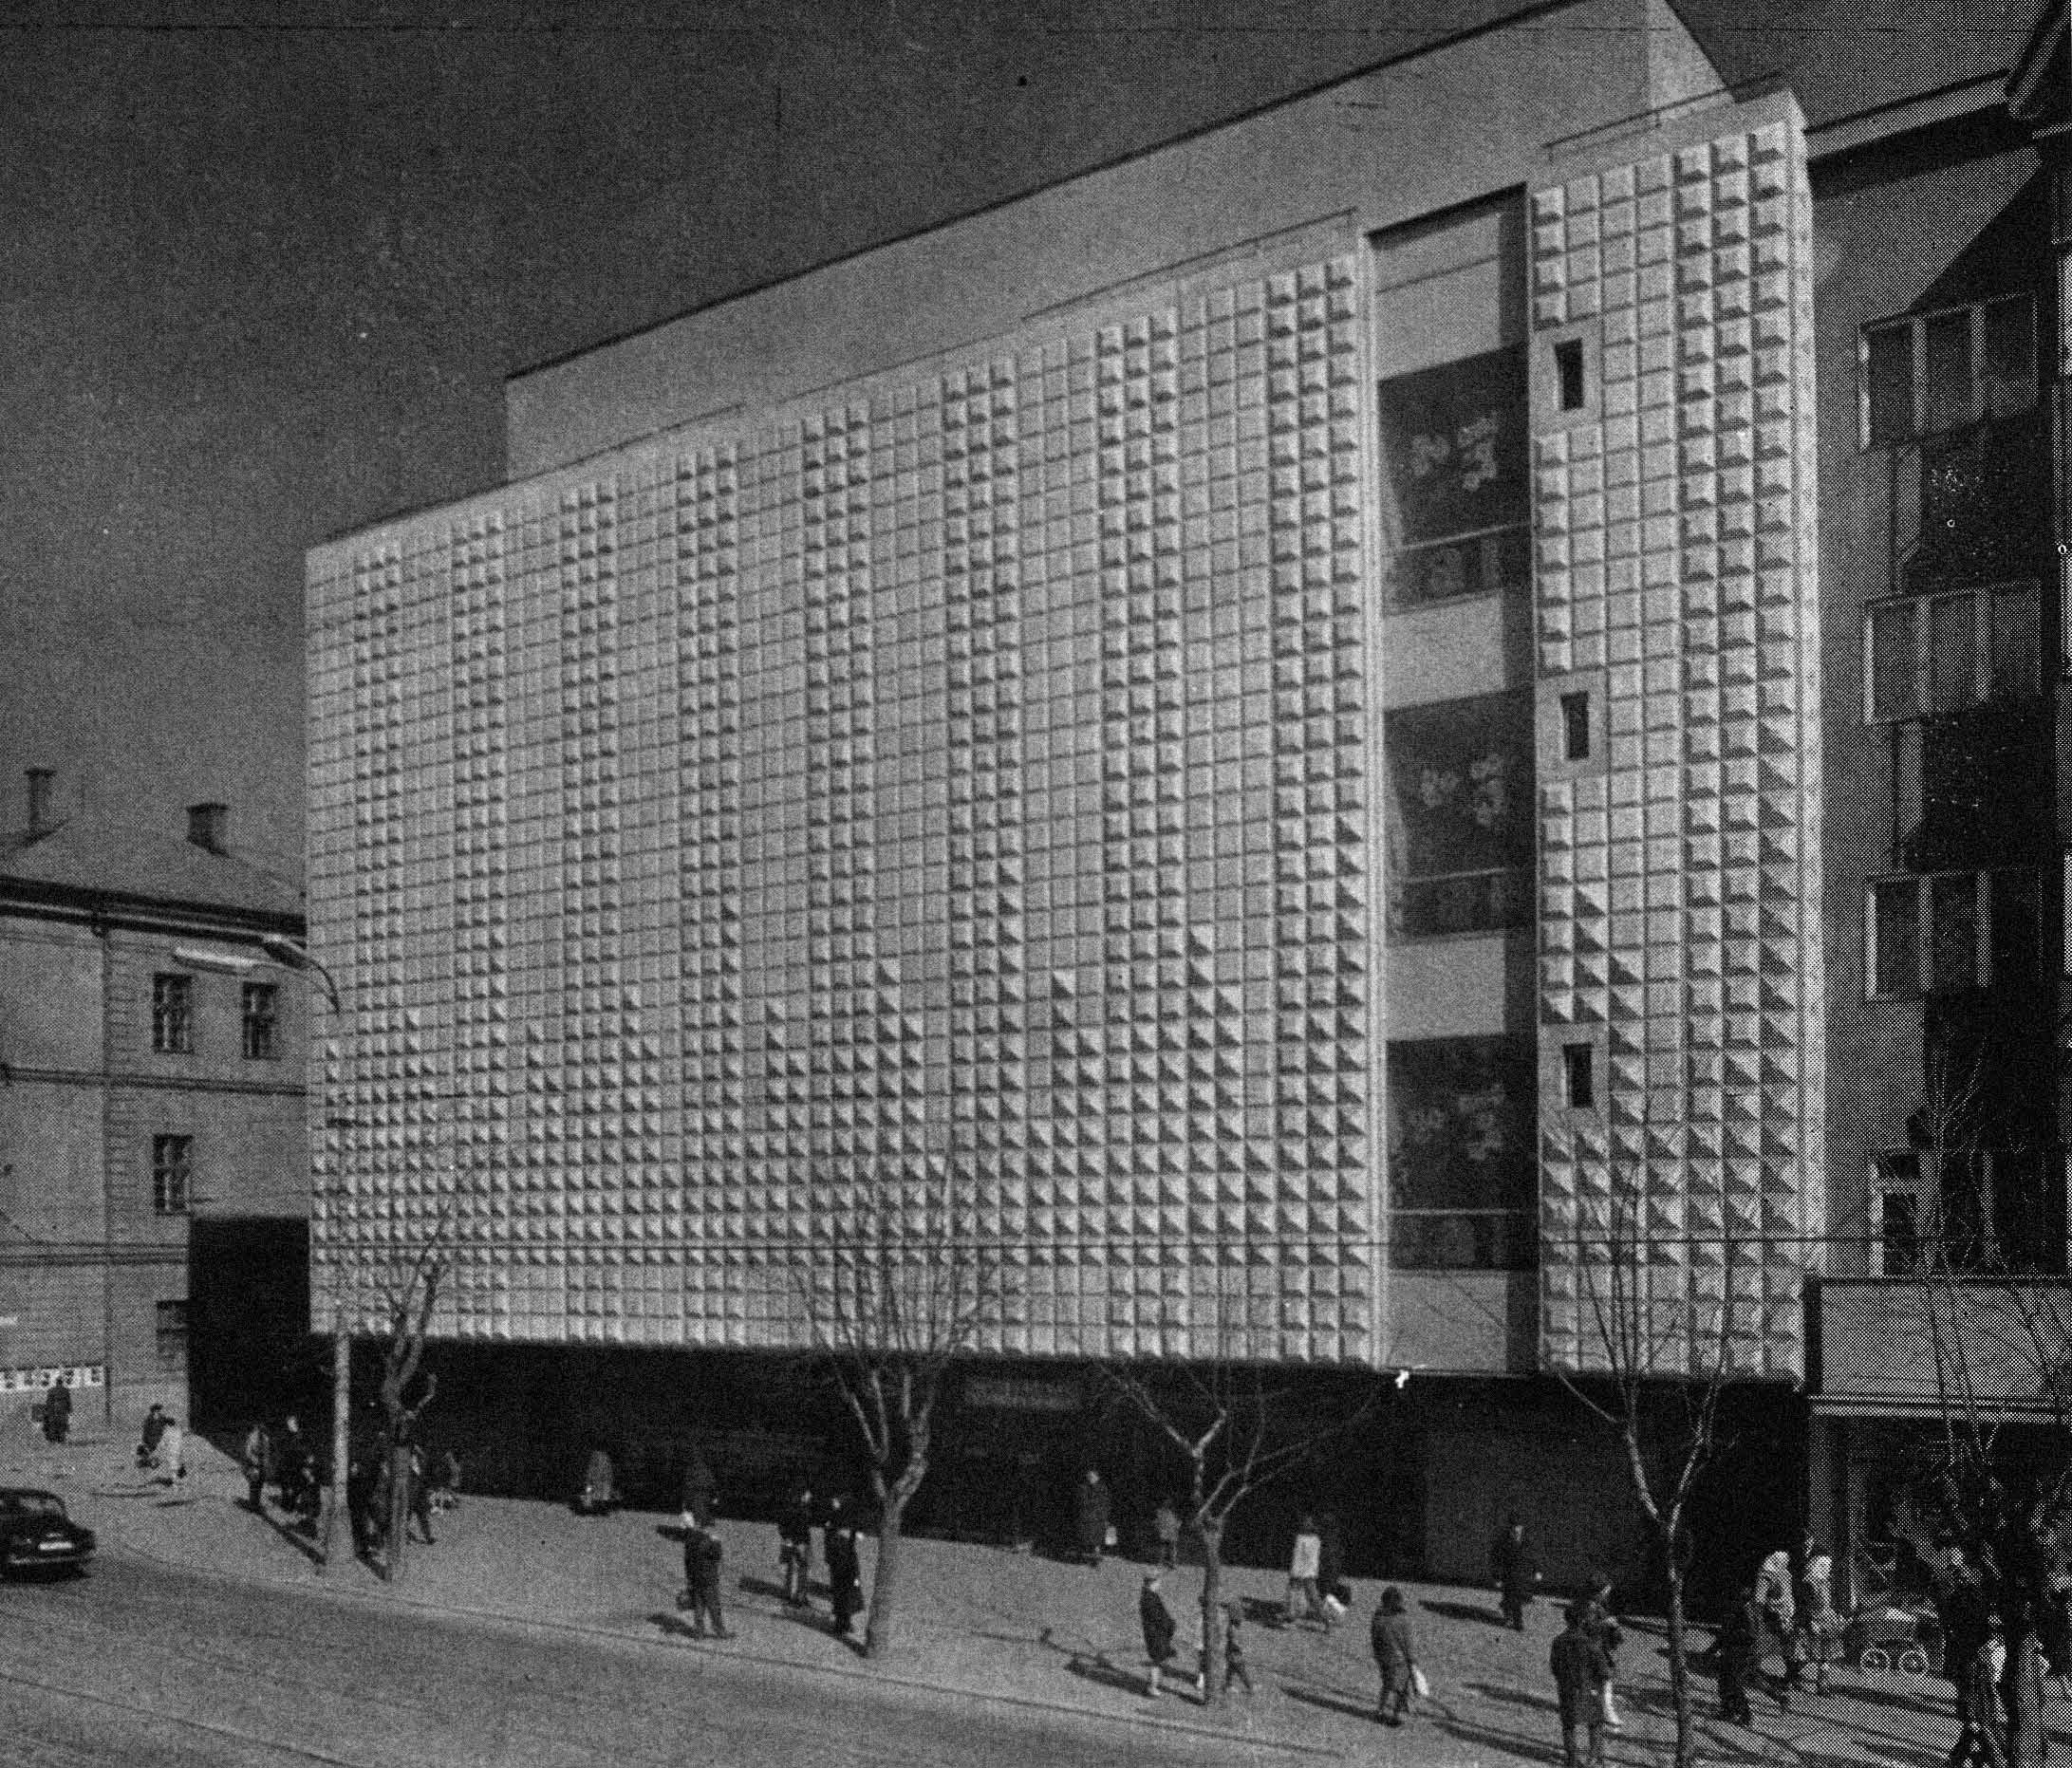 The Prior Department Store in Košice in the Context of History, Current Structural Alterations and Engaged Preservation